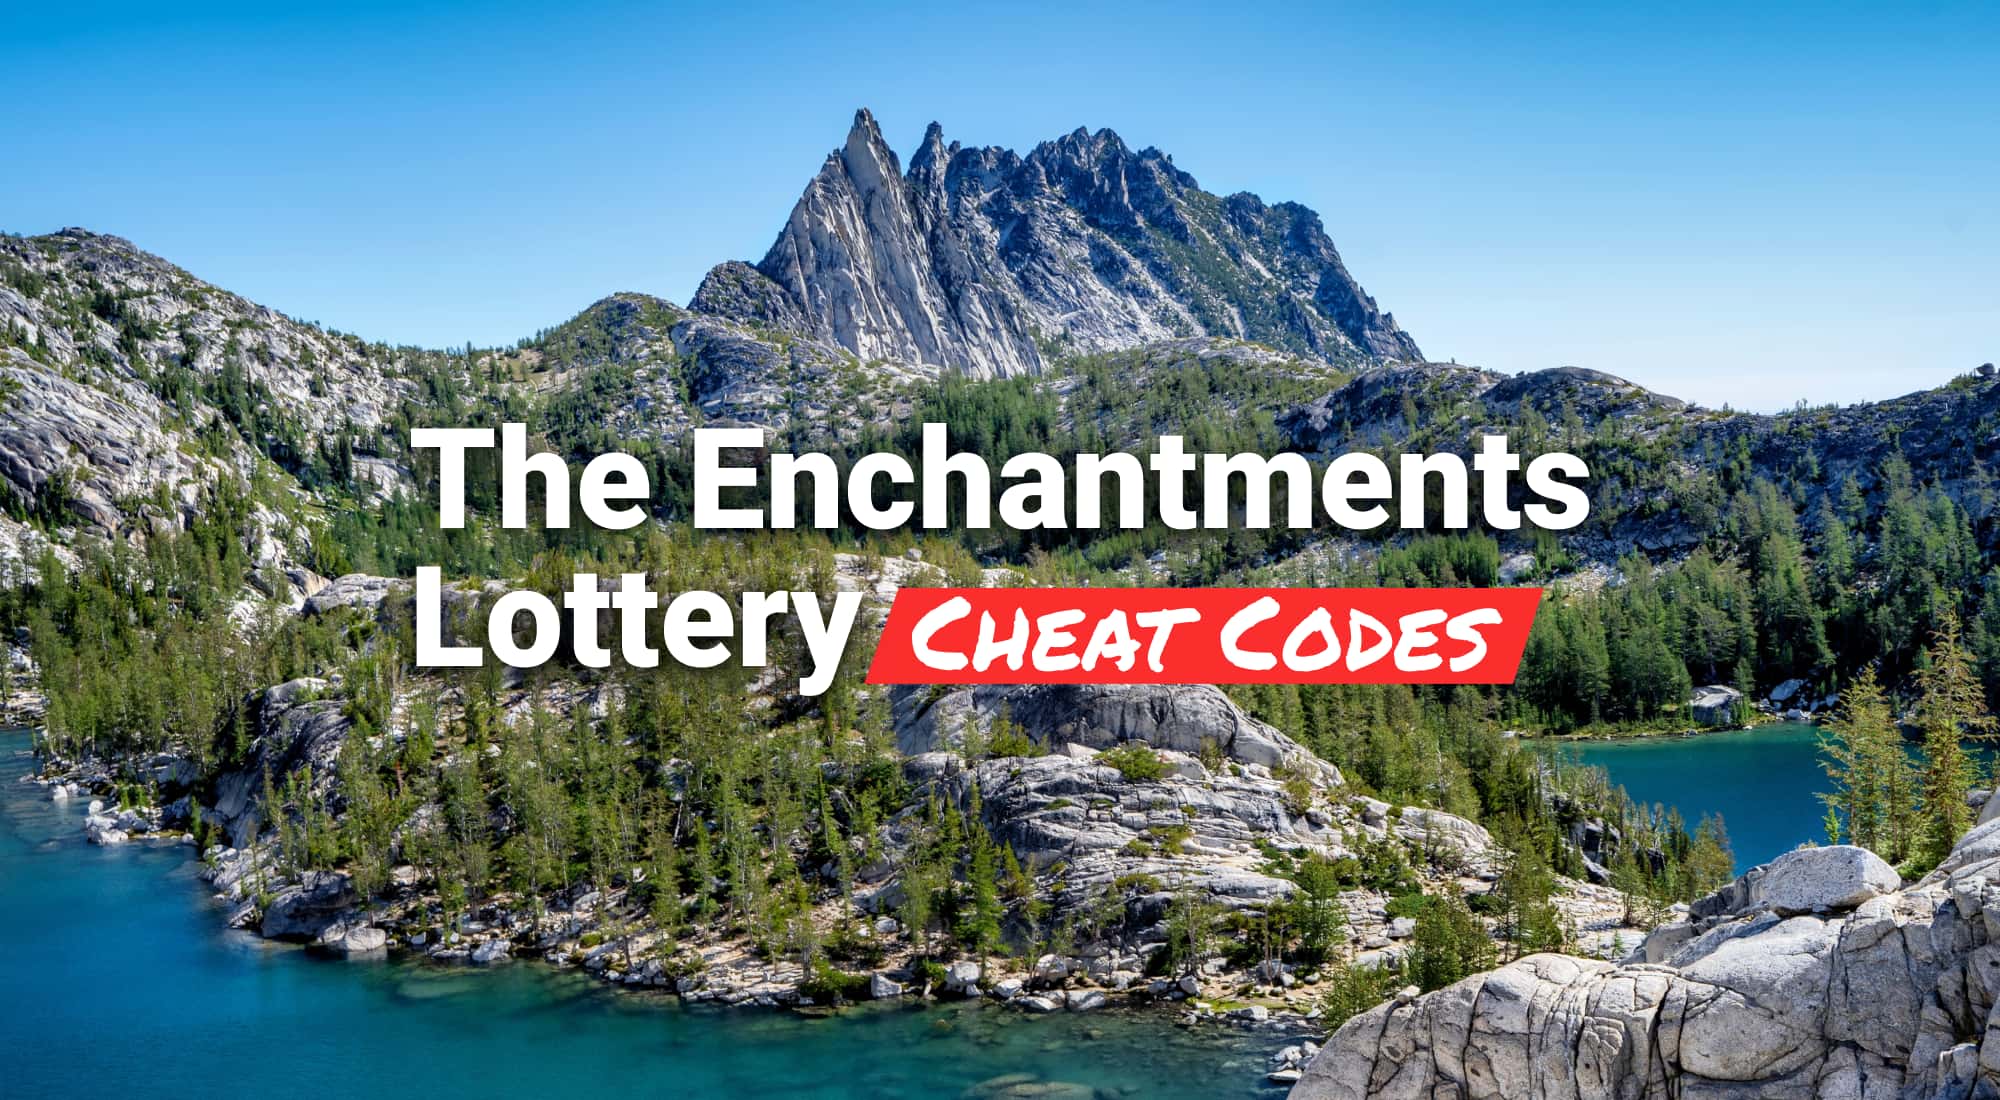 The Enchantments Lottery Cheat Codes